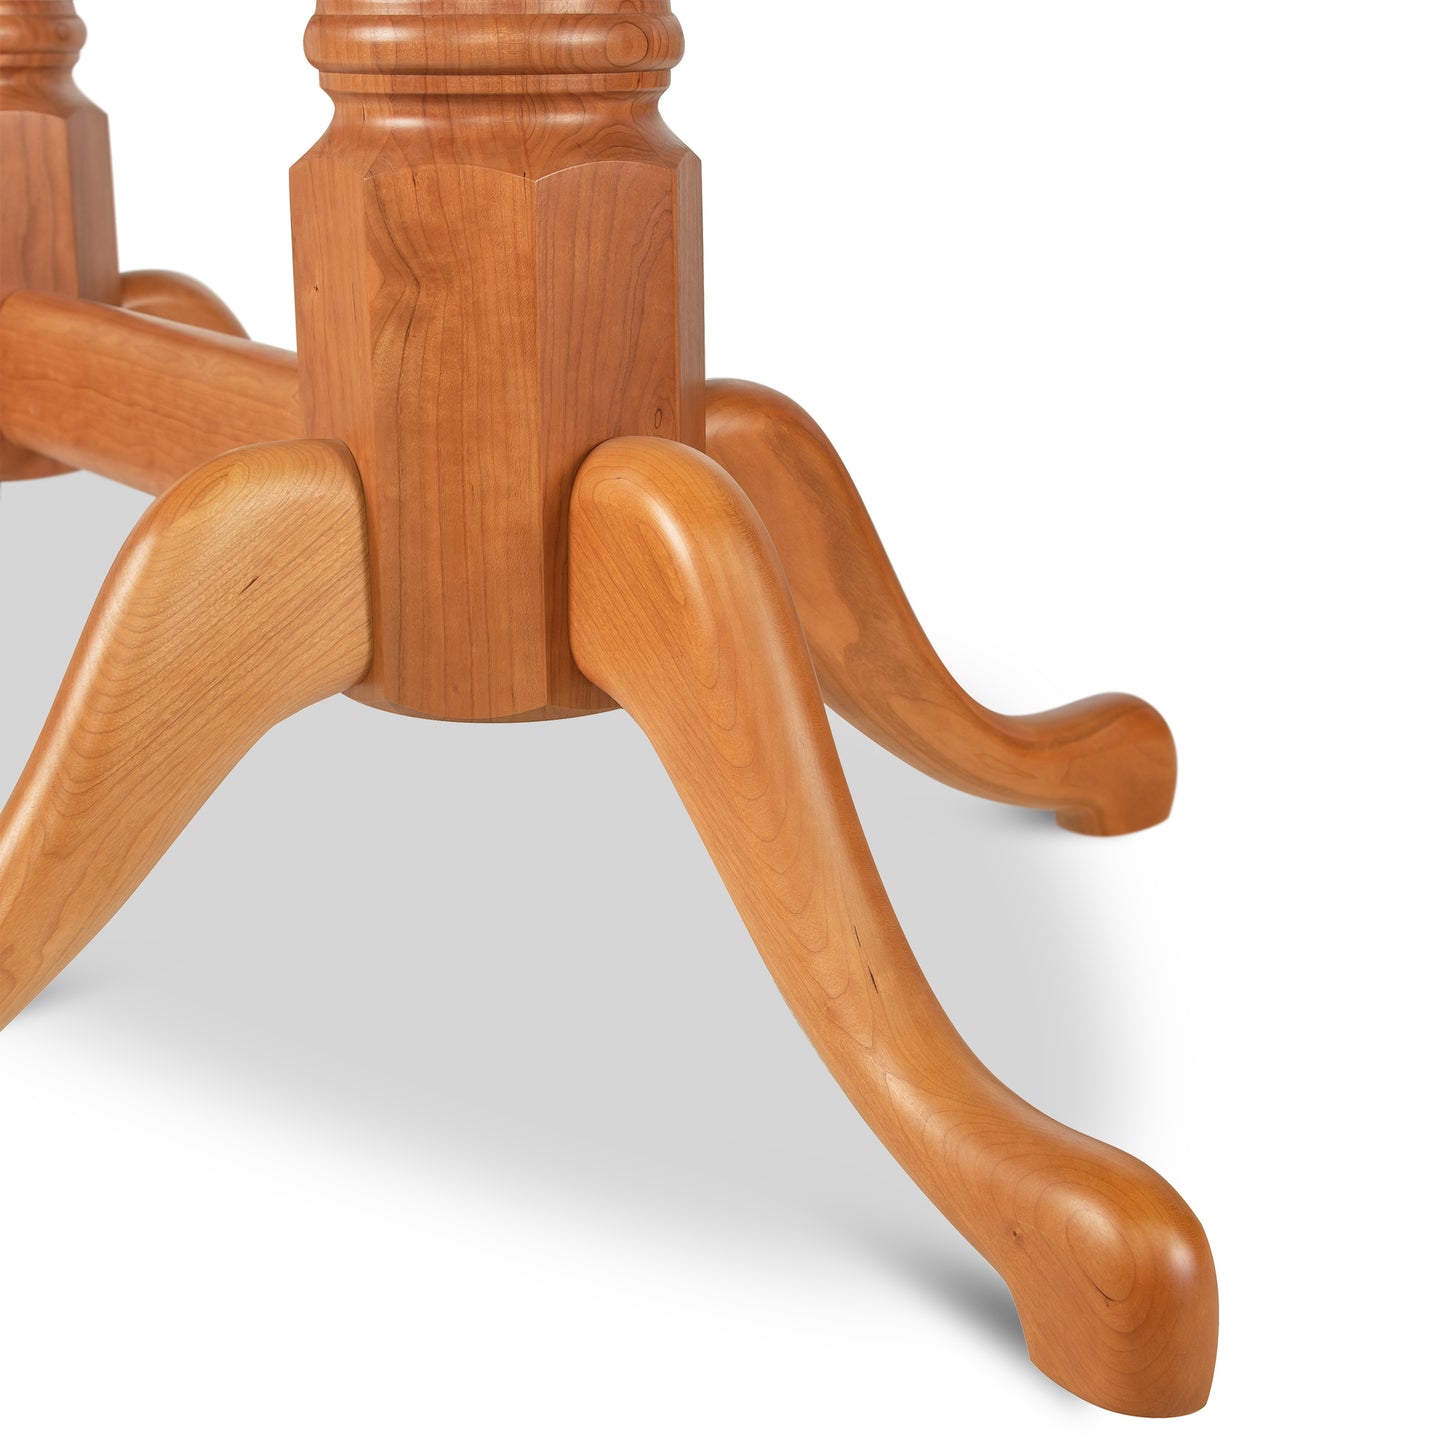 A modern wooden table with Lyndon Furniture's Cabriole Oval Double Pedestal Solid Top Table feet.